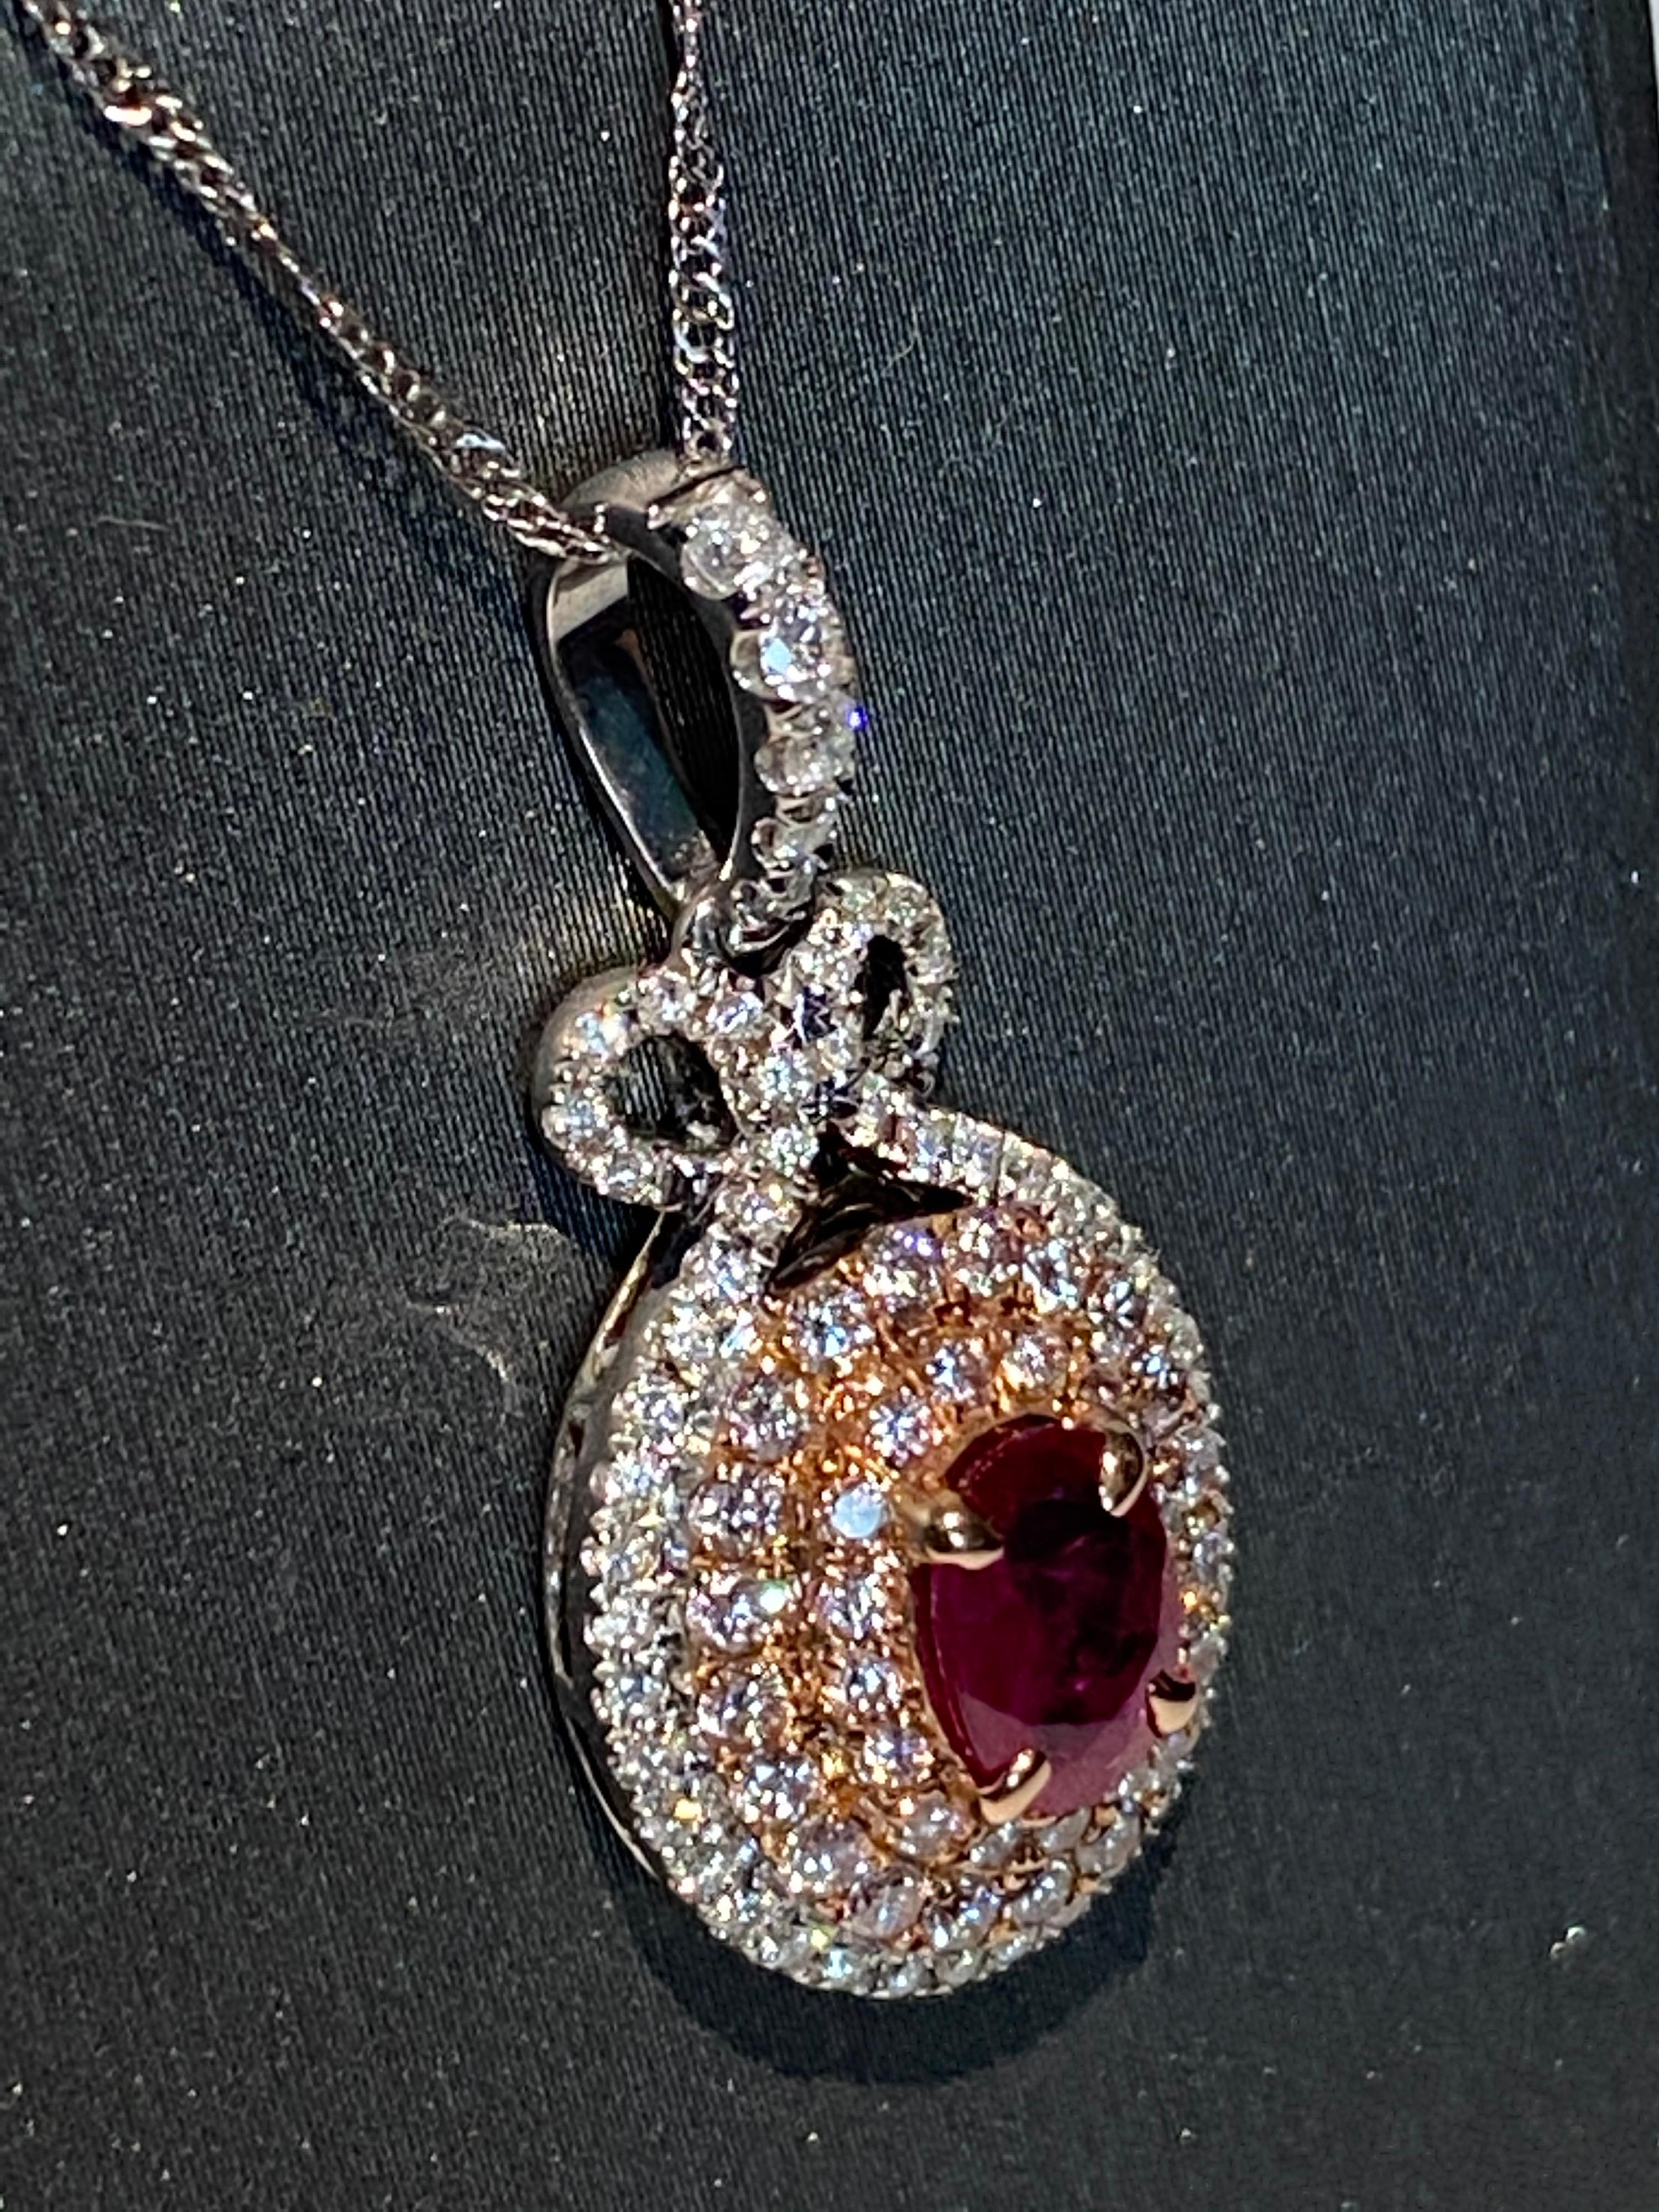 Oval ruby is framed by three rows of pink and white diamond. it is set in two tone gold and crafted with hand.
White gold chain is included with the pendant. 
Ruby: 0.85ct
Pink Diamond: 0.43ct
White Diamond: 0.32ct
Two Tone Gold: 14K
Length: 18 inch